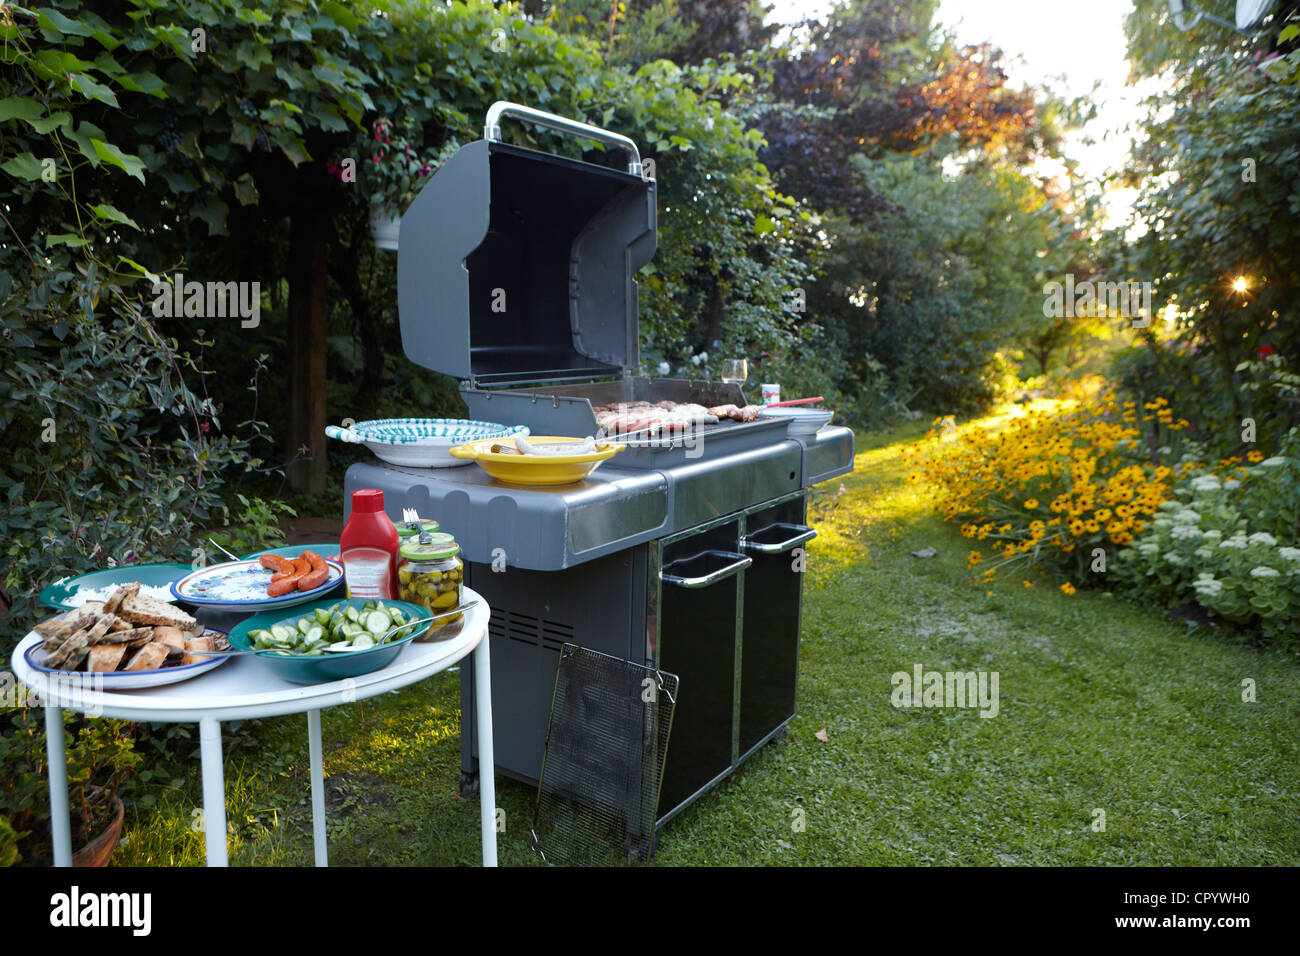 bbq area with large barbecue salads and side dishes in the garden CPYWH0